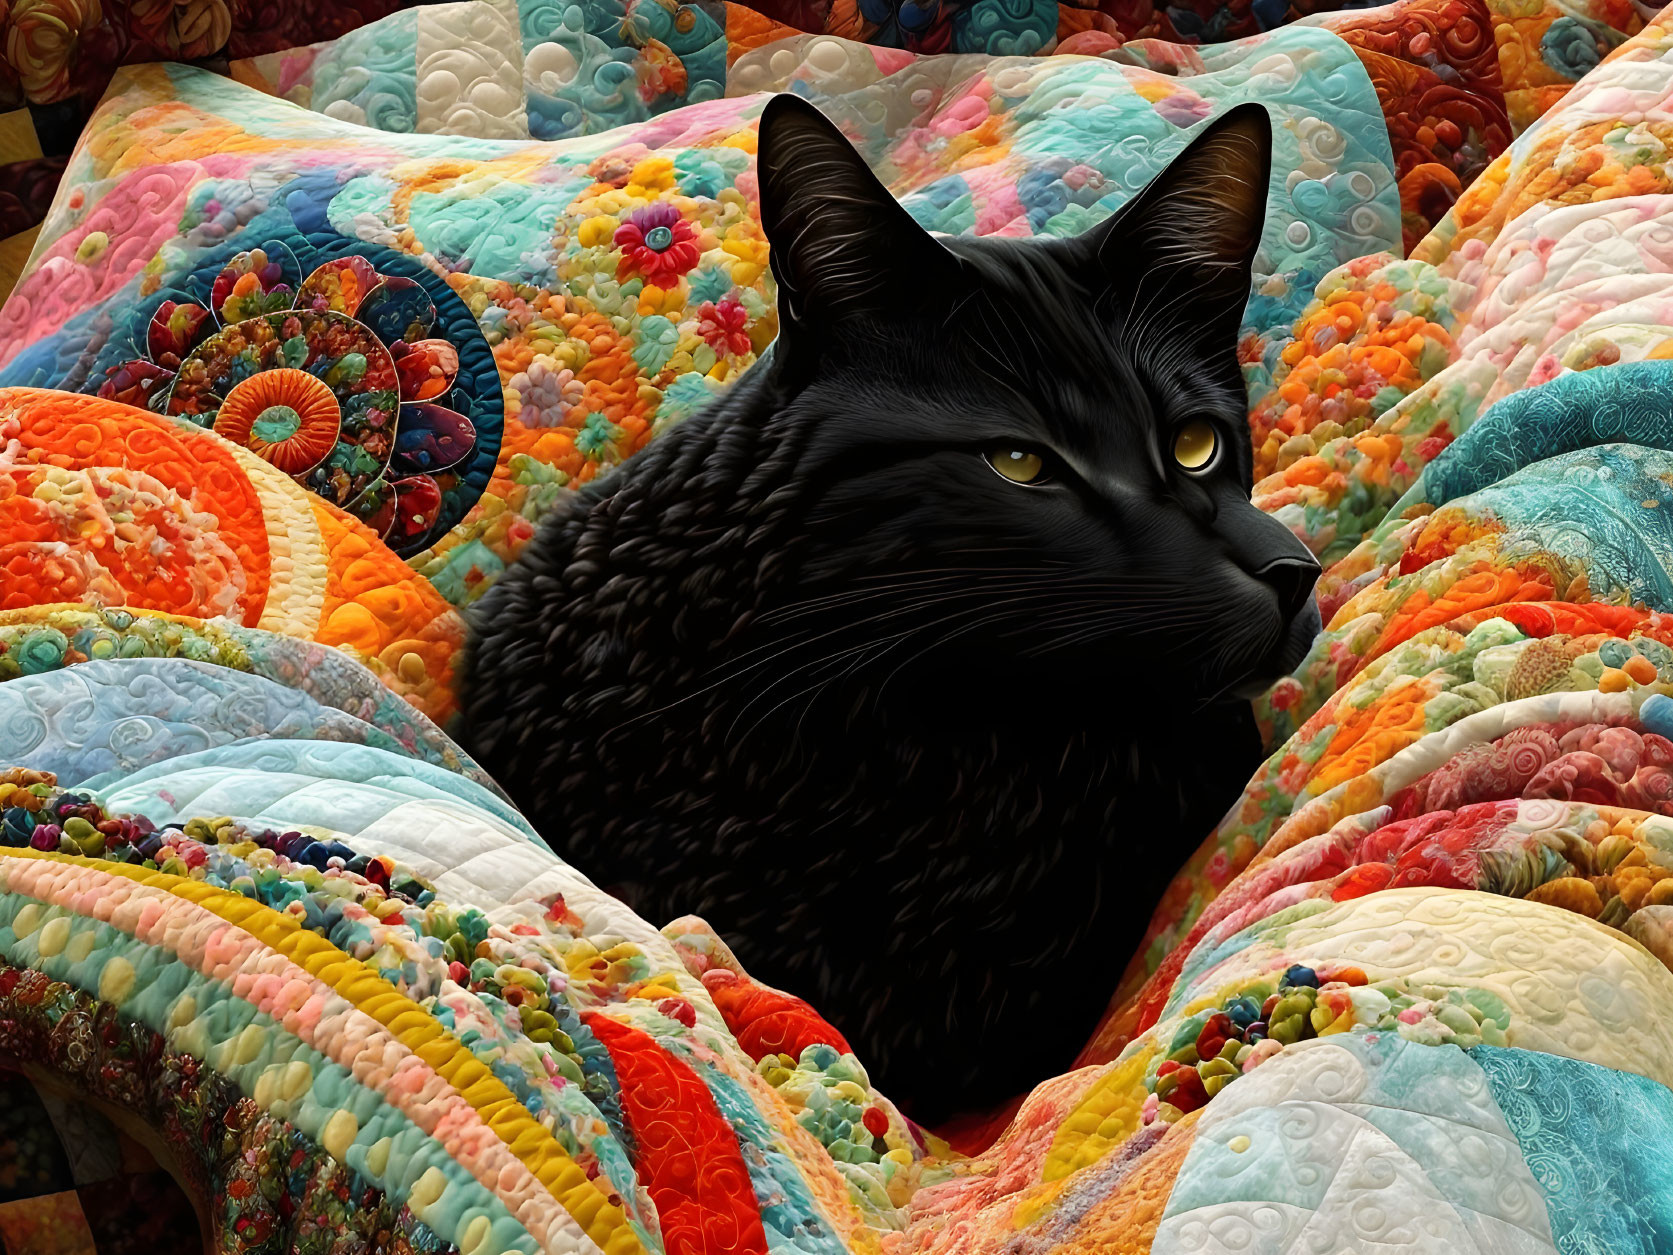 Black Cat Resting on Colorful Patchwork Quilt